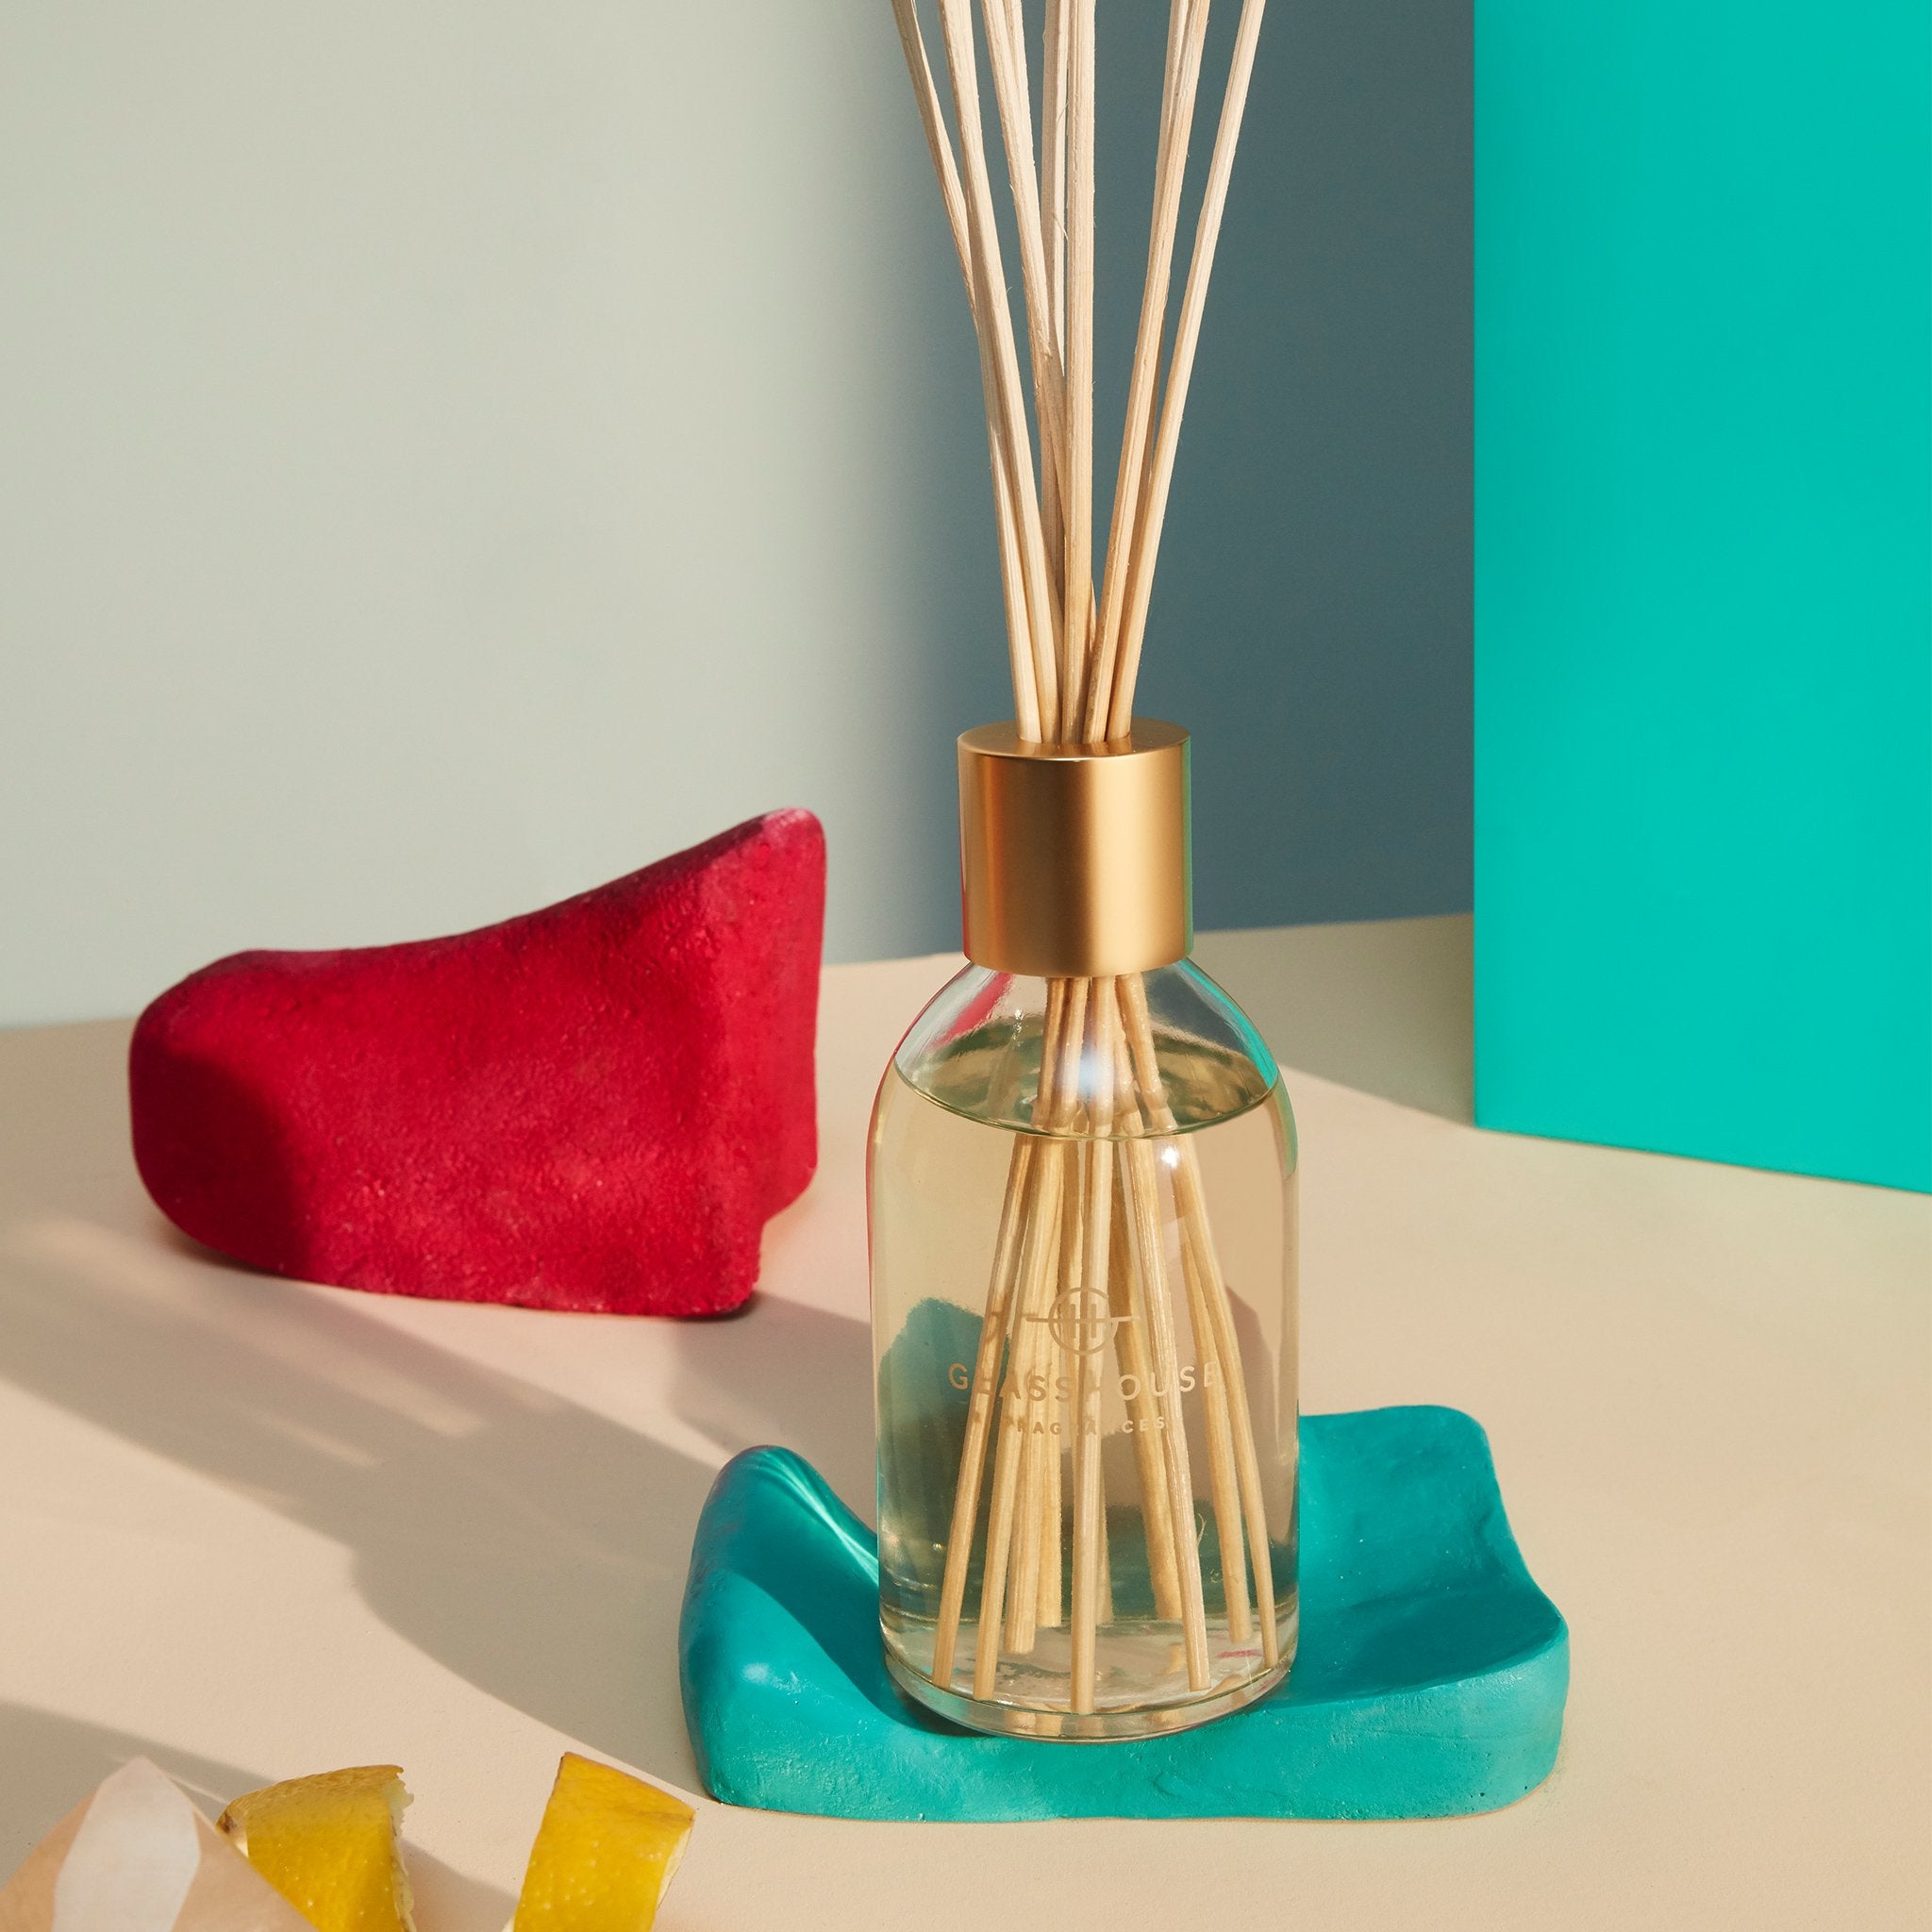 Glasshouse Fragrances fragrance diffuser on tabletop surrounded by coloured ornaments